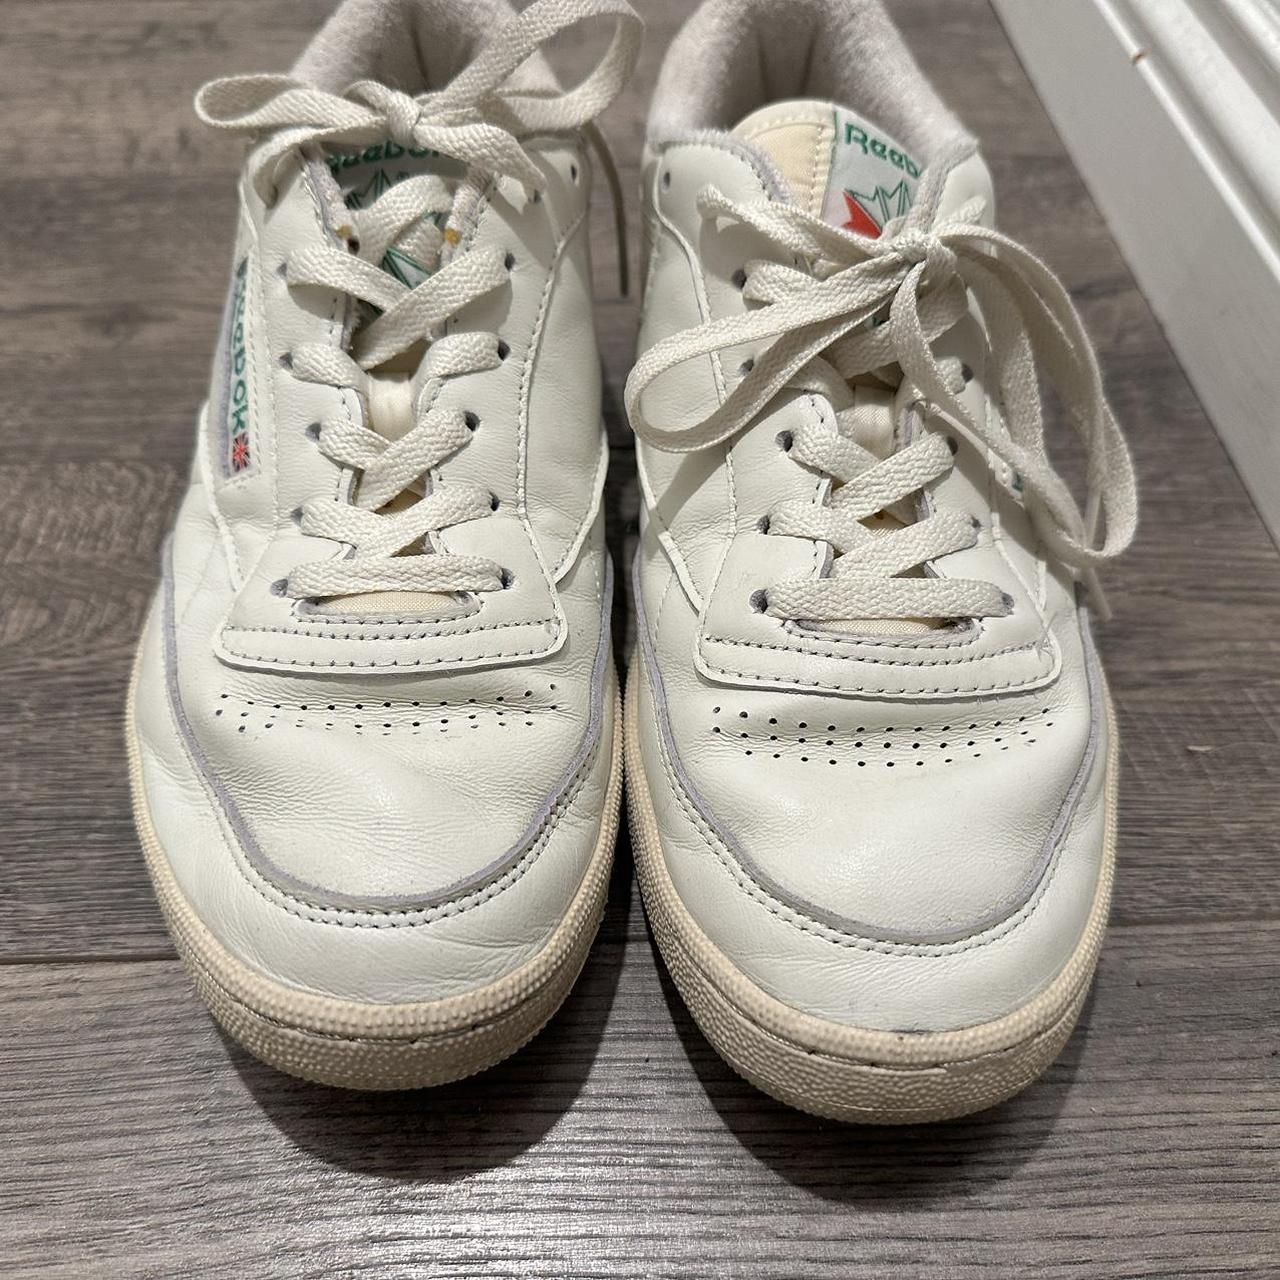 Reebok Club C 85 In good condition, there are a few... - Depop